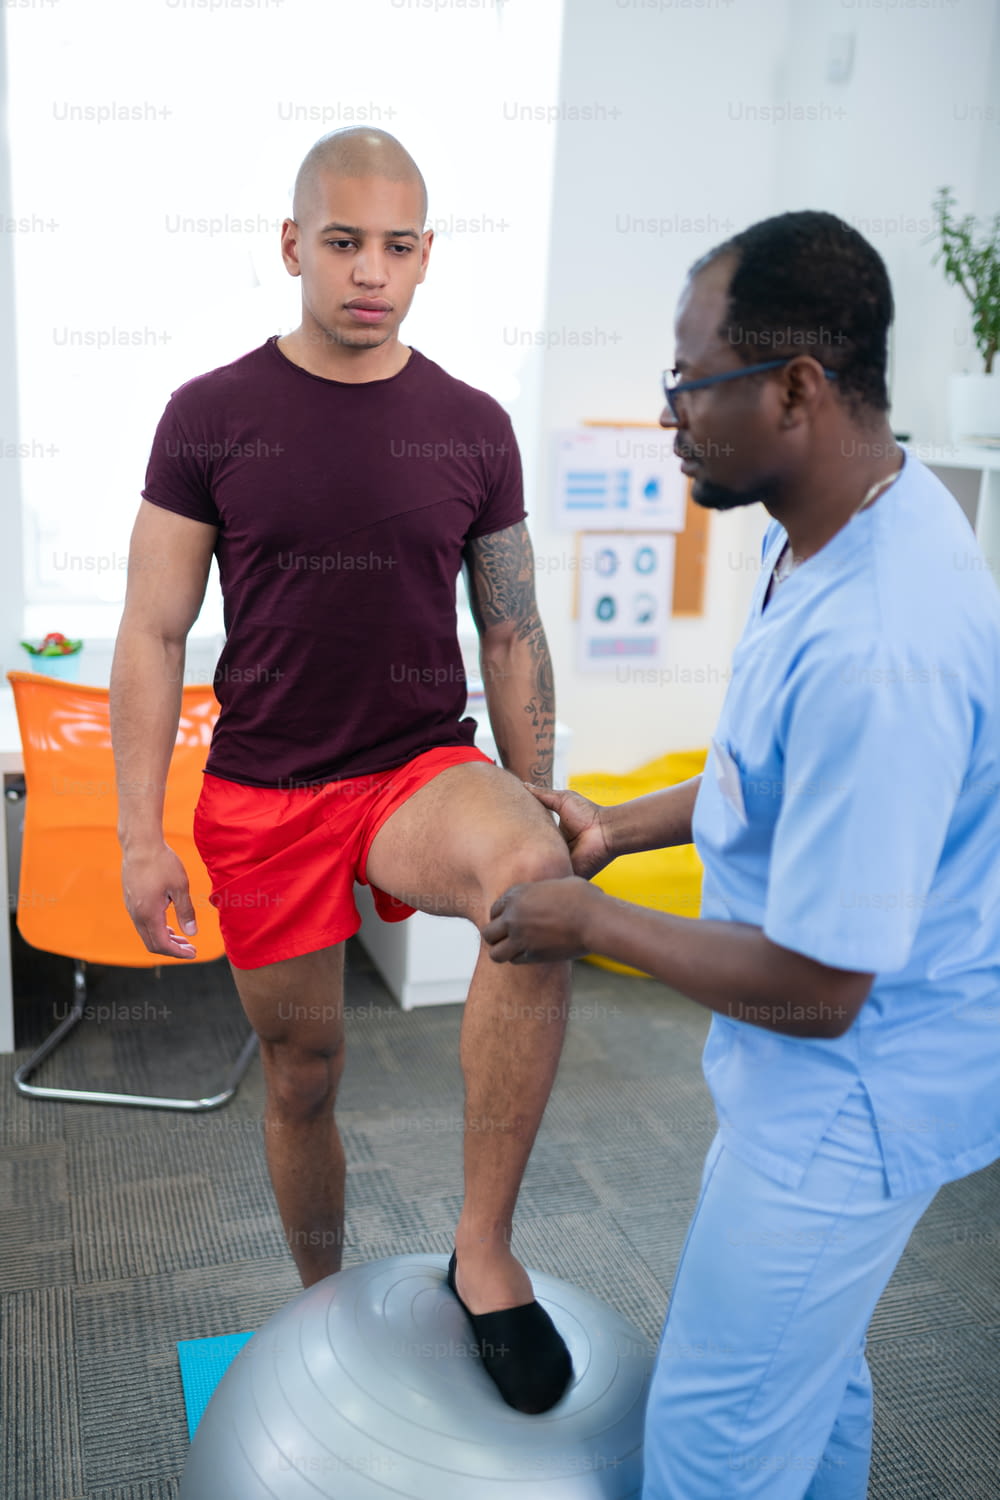 Examining knee. Therapist examining knee of bodybuilder standing near fit ball after serious injury